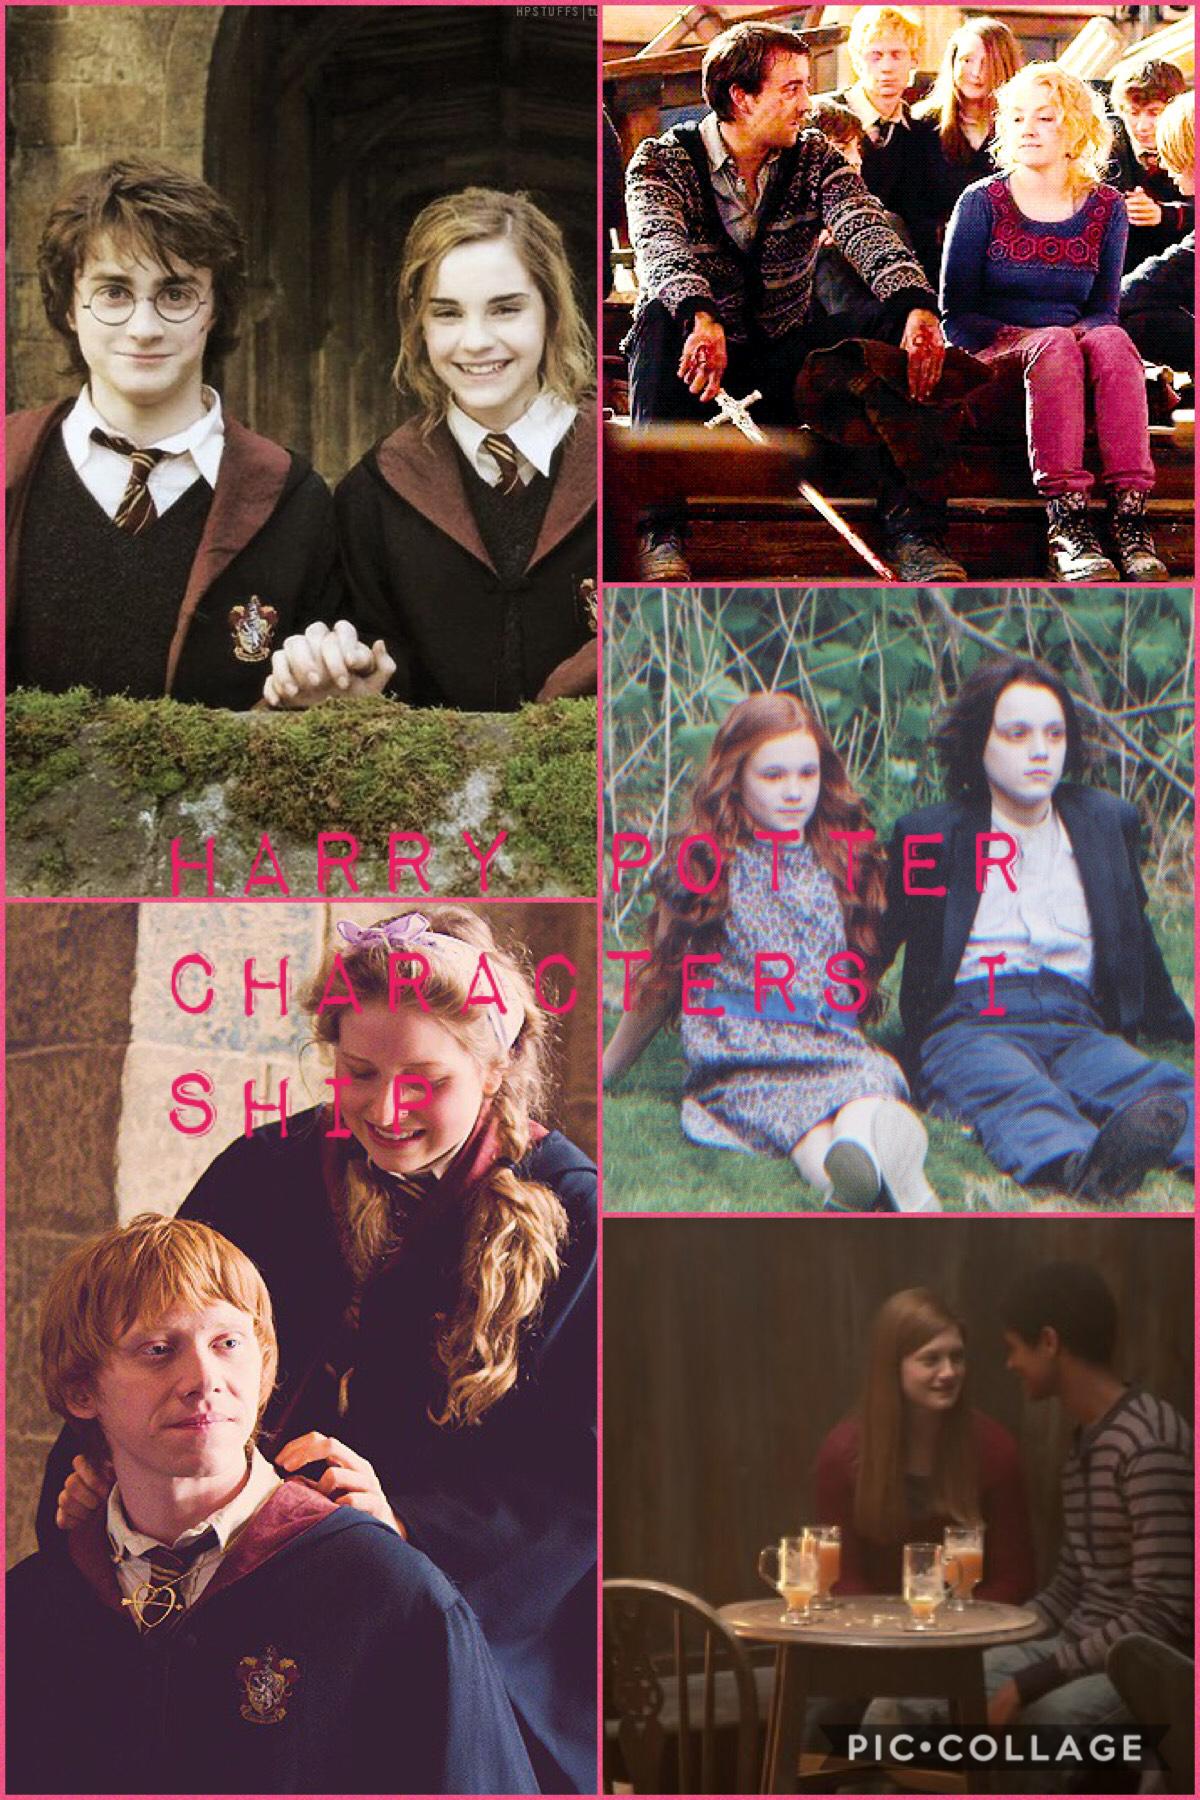 Harry Potter characters I ship, what do you ship??